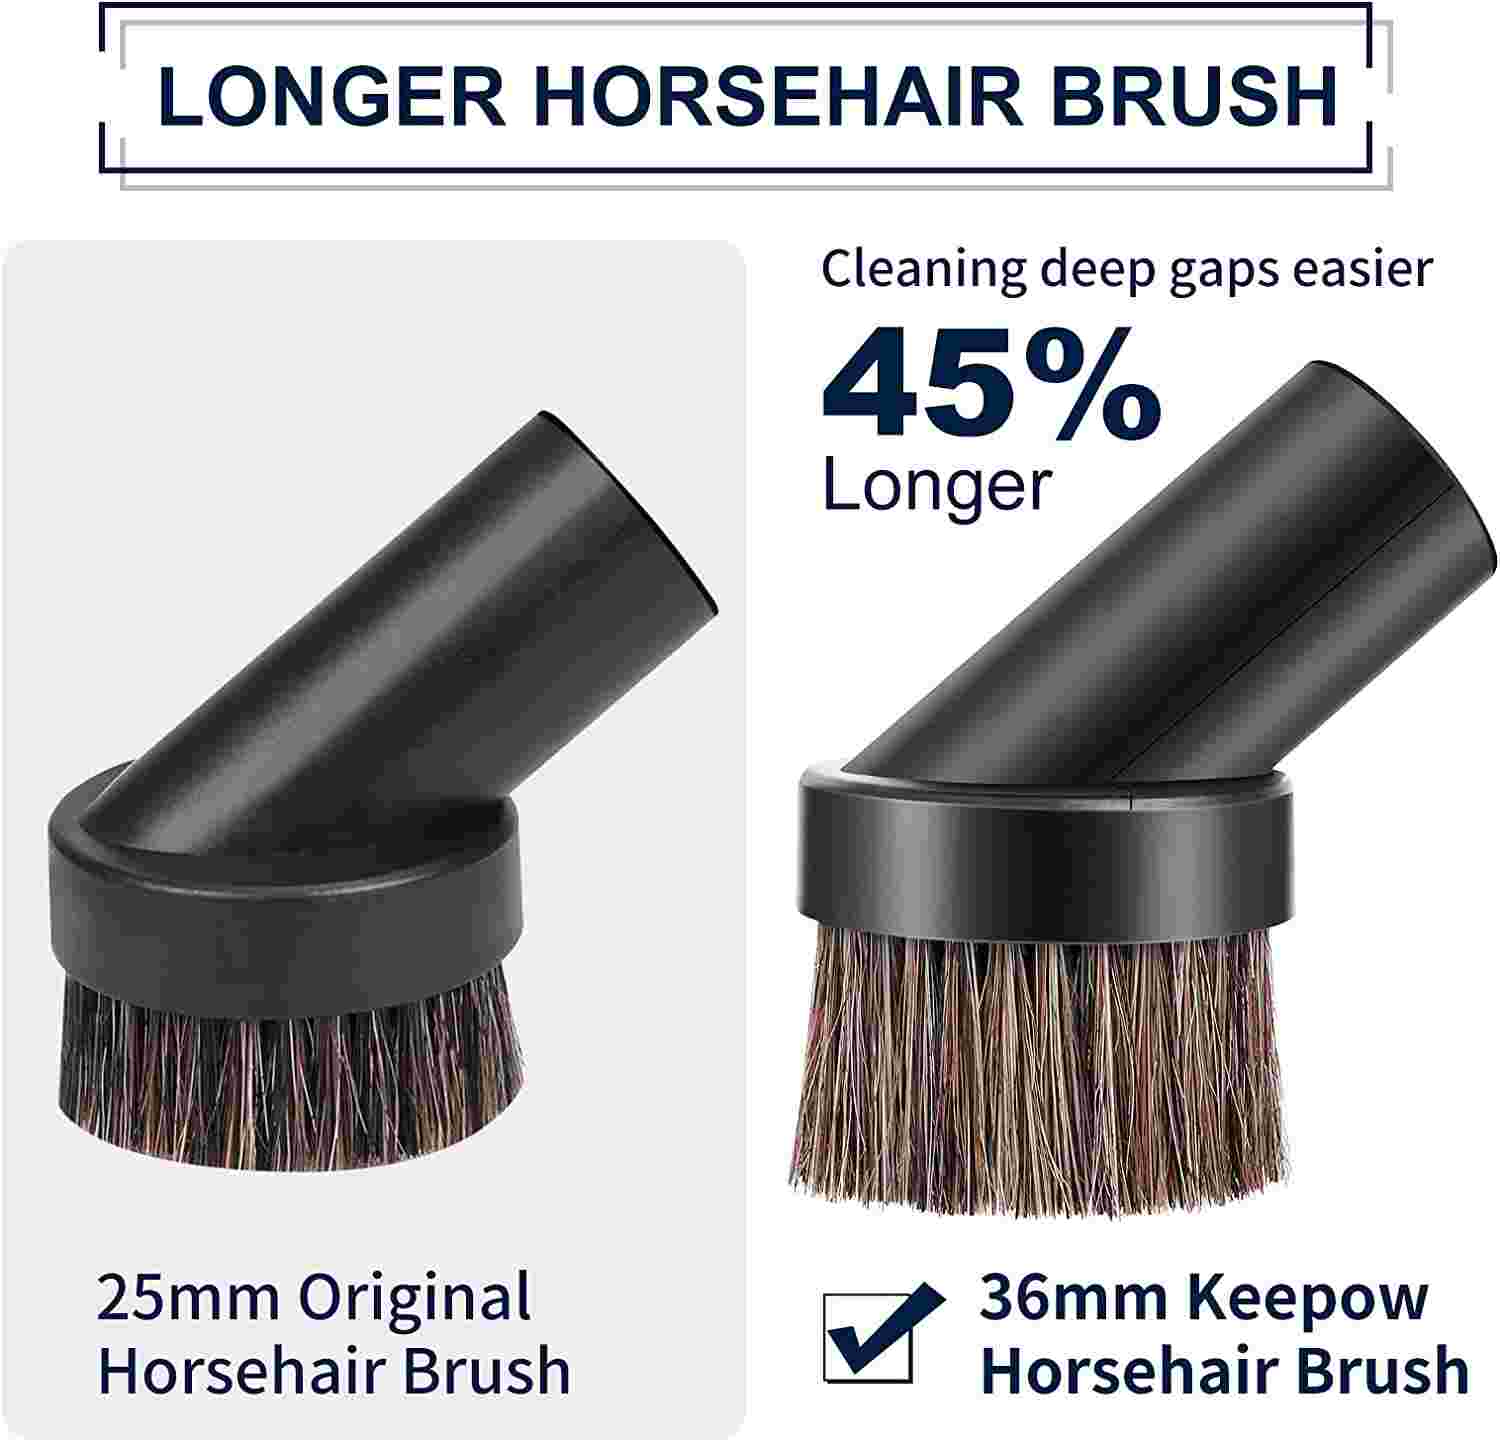 KEEPOW 36mm Horse Hair Vacuum Attachment Brush With Universal Connector Fit for 25mm/1", 32mm/1-1/4", 35mm/1-3/8" Hose